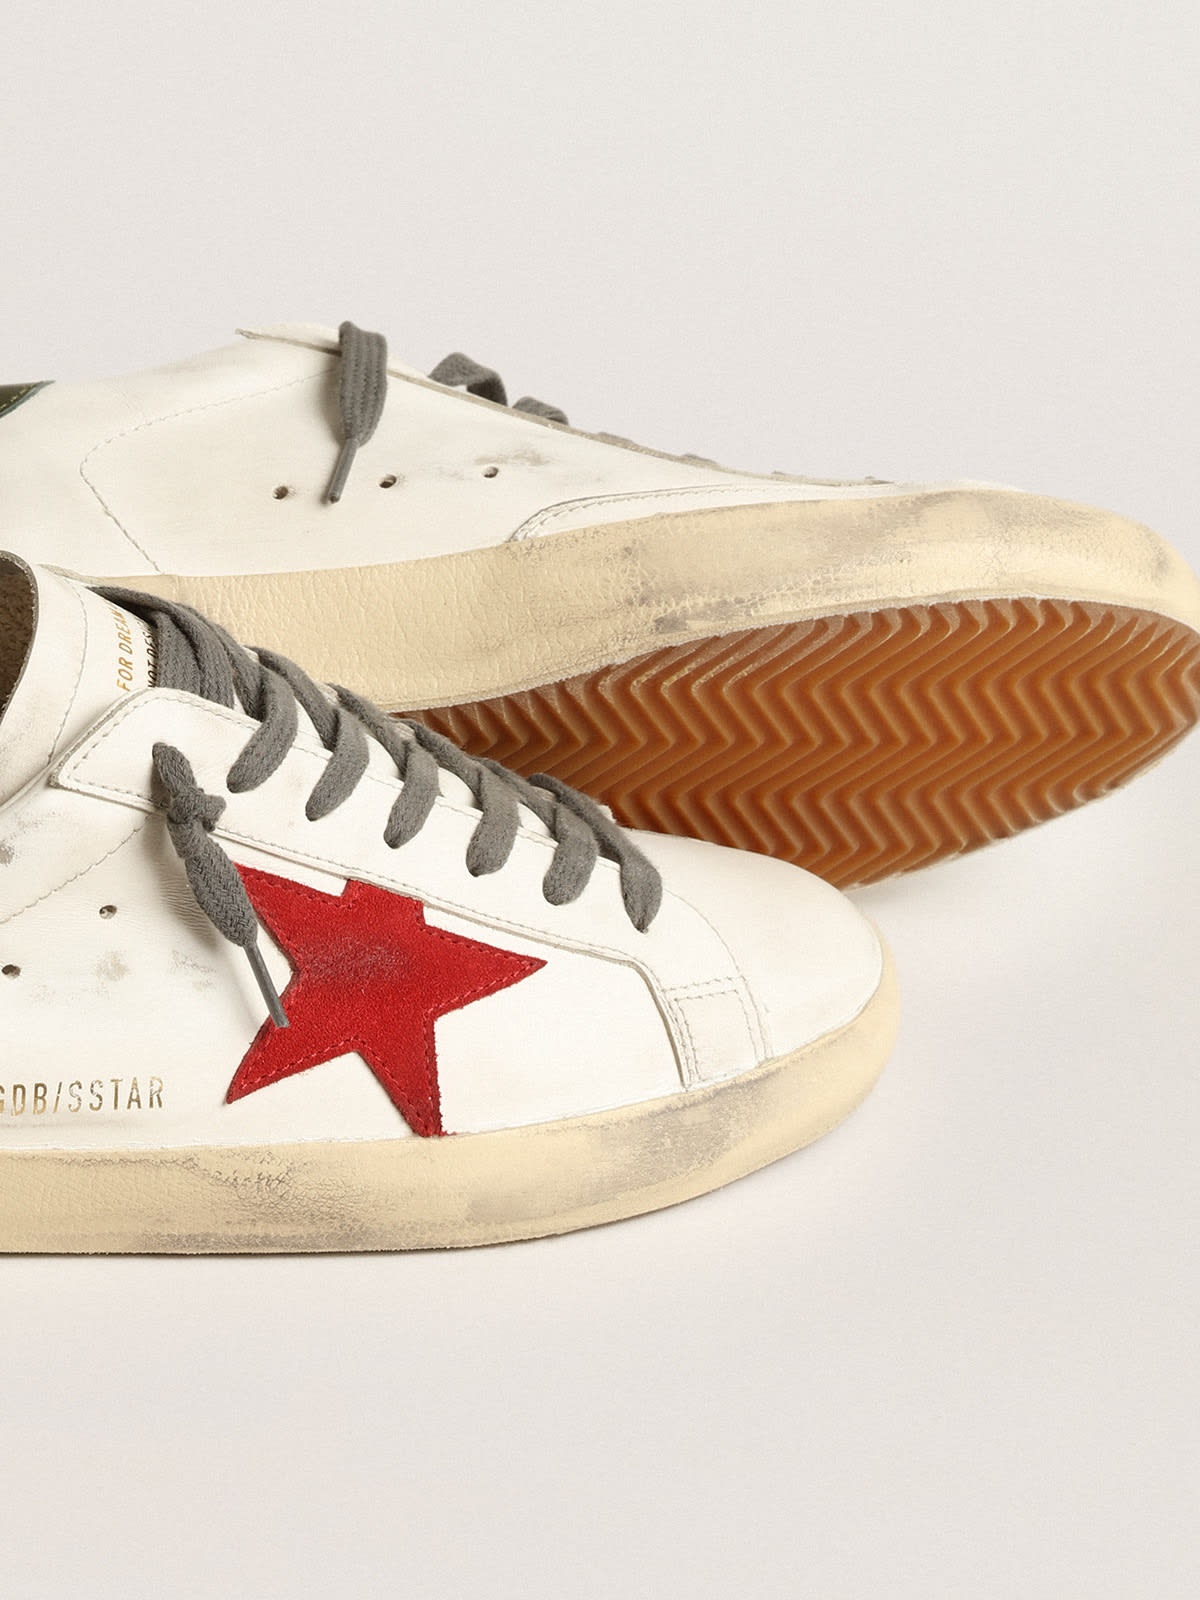 Golden Goose - Men's Ball Star in White Nappa Leather with Green Leather Star and Heel Tab, Man, Size: 41